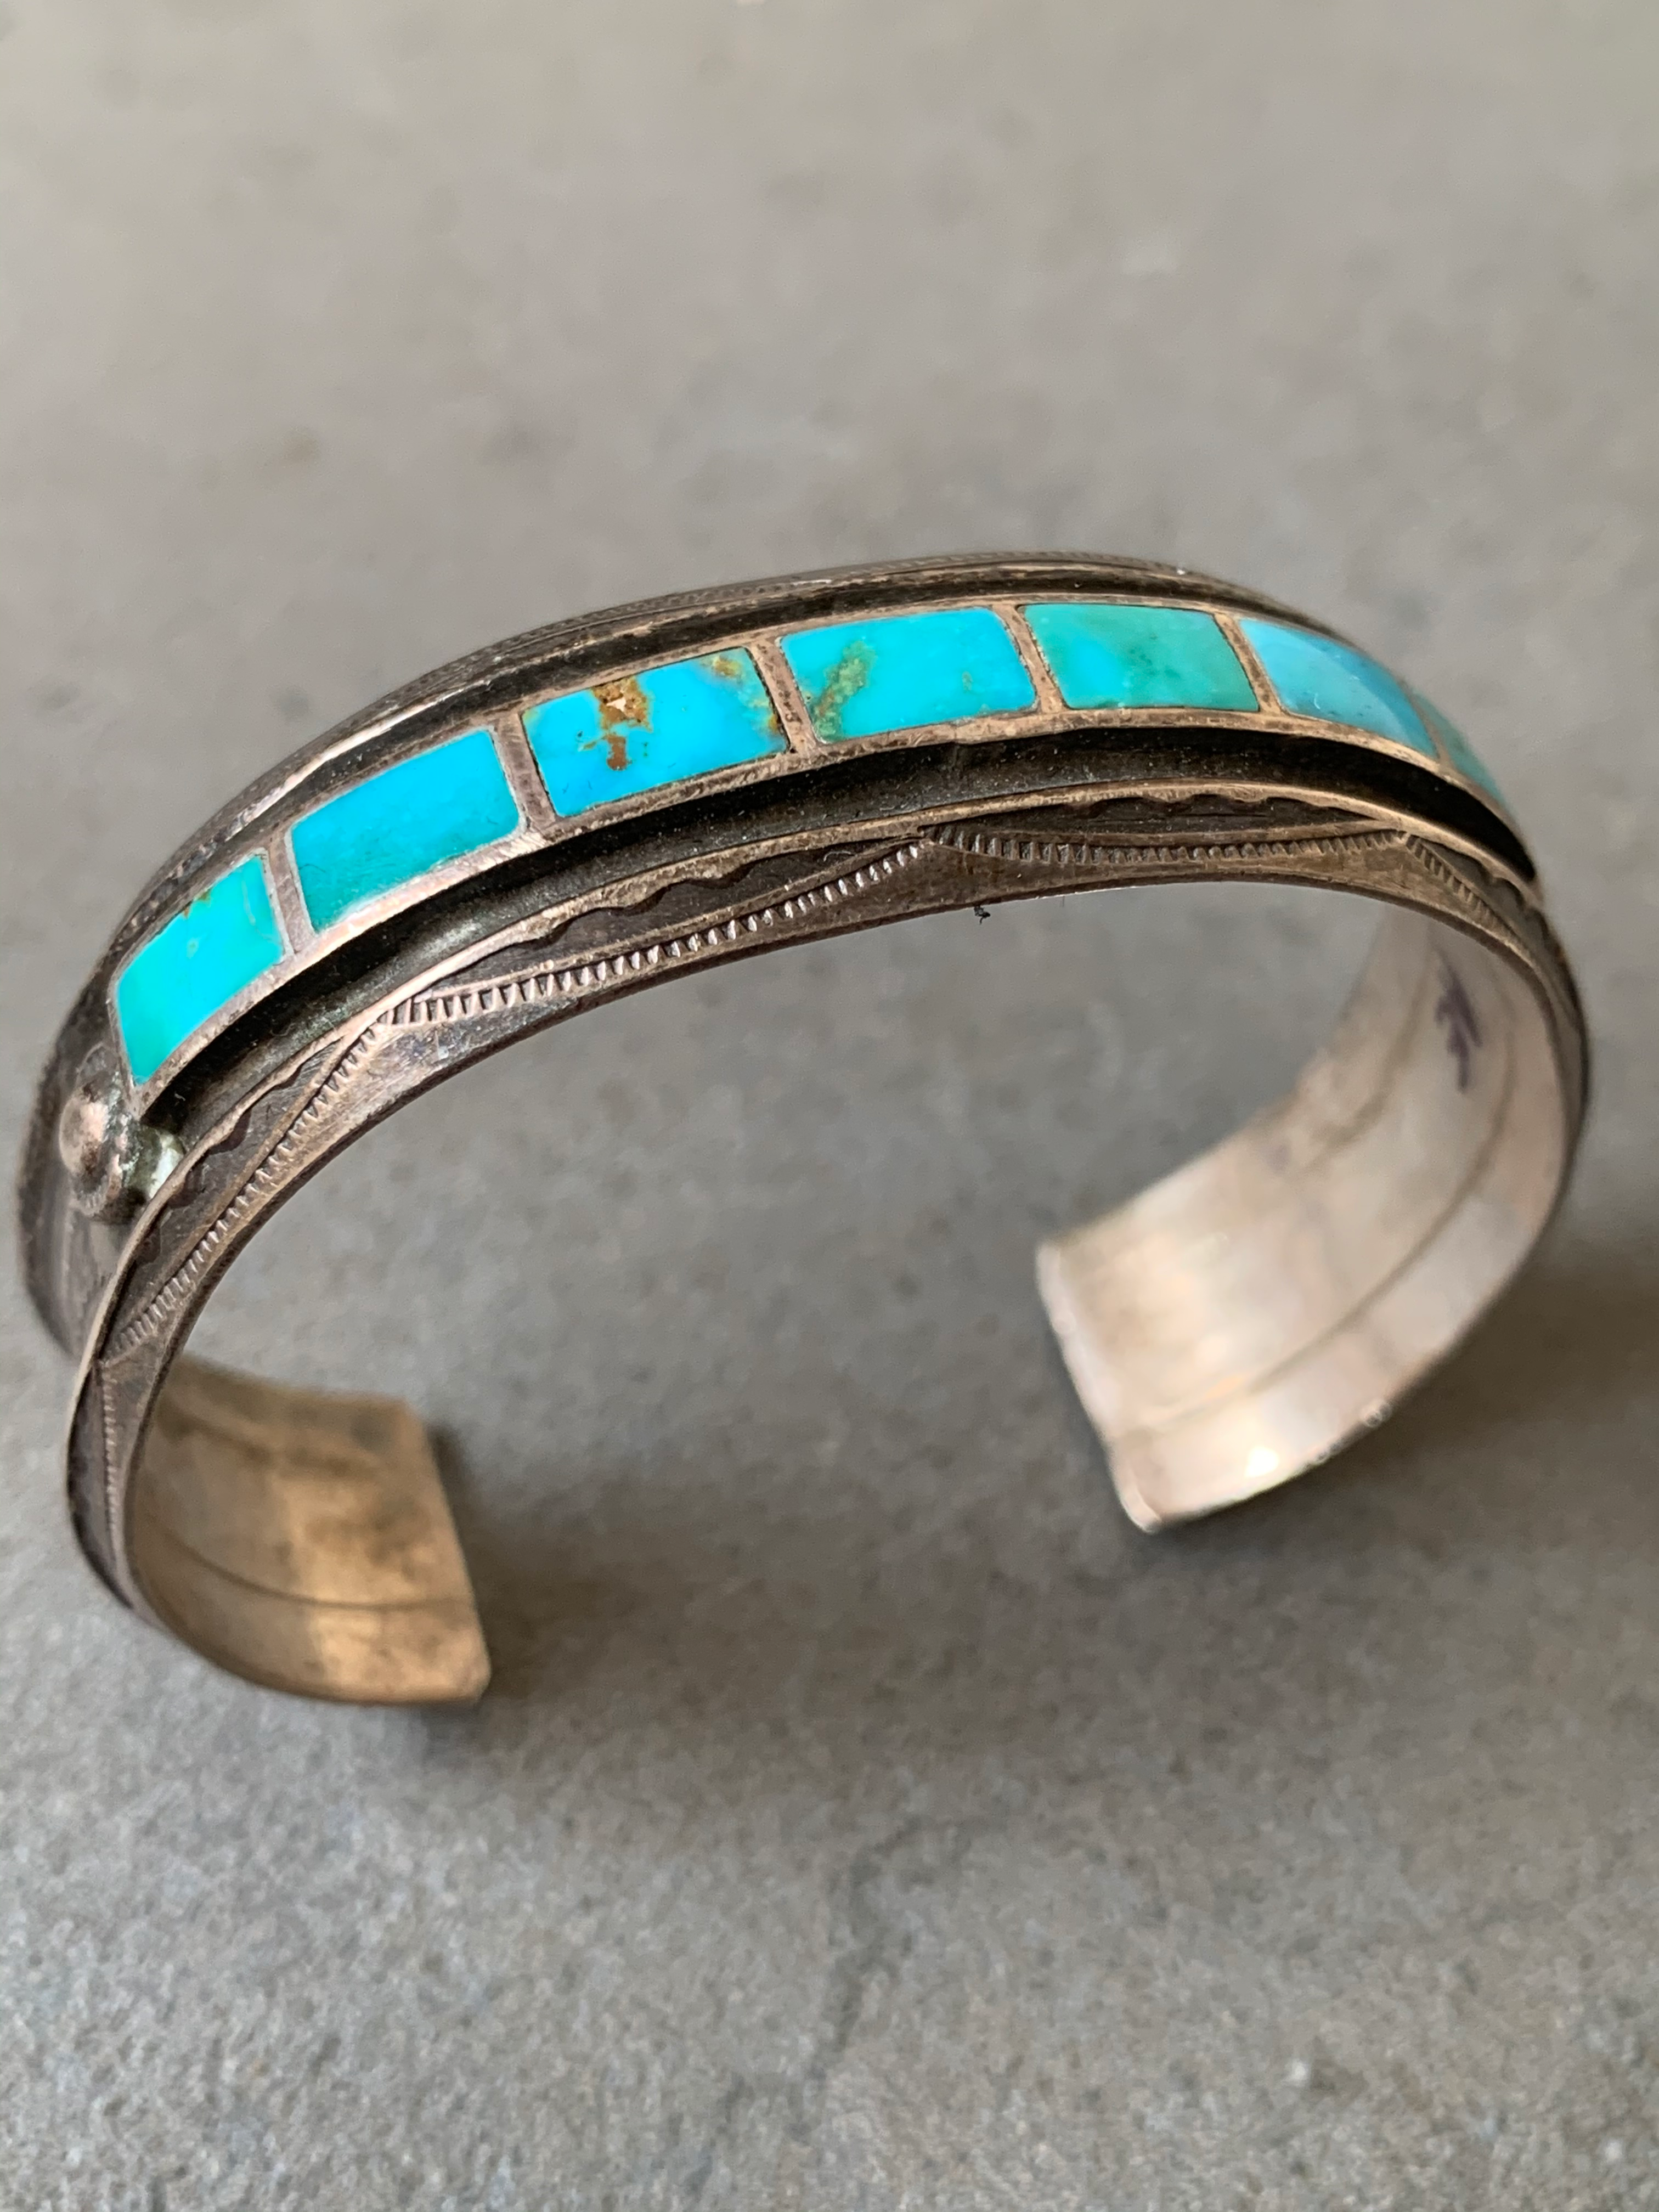 Blue Gem Turquoise sterling Silver Cuff Handmade